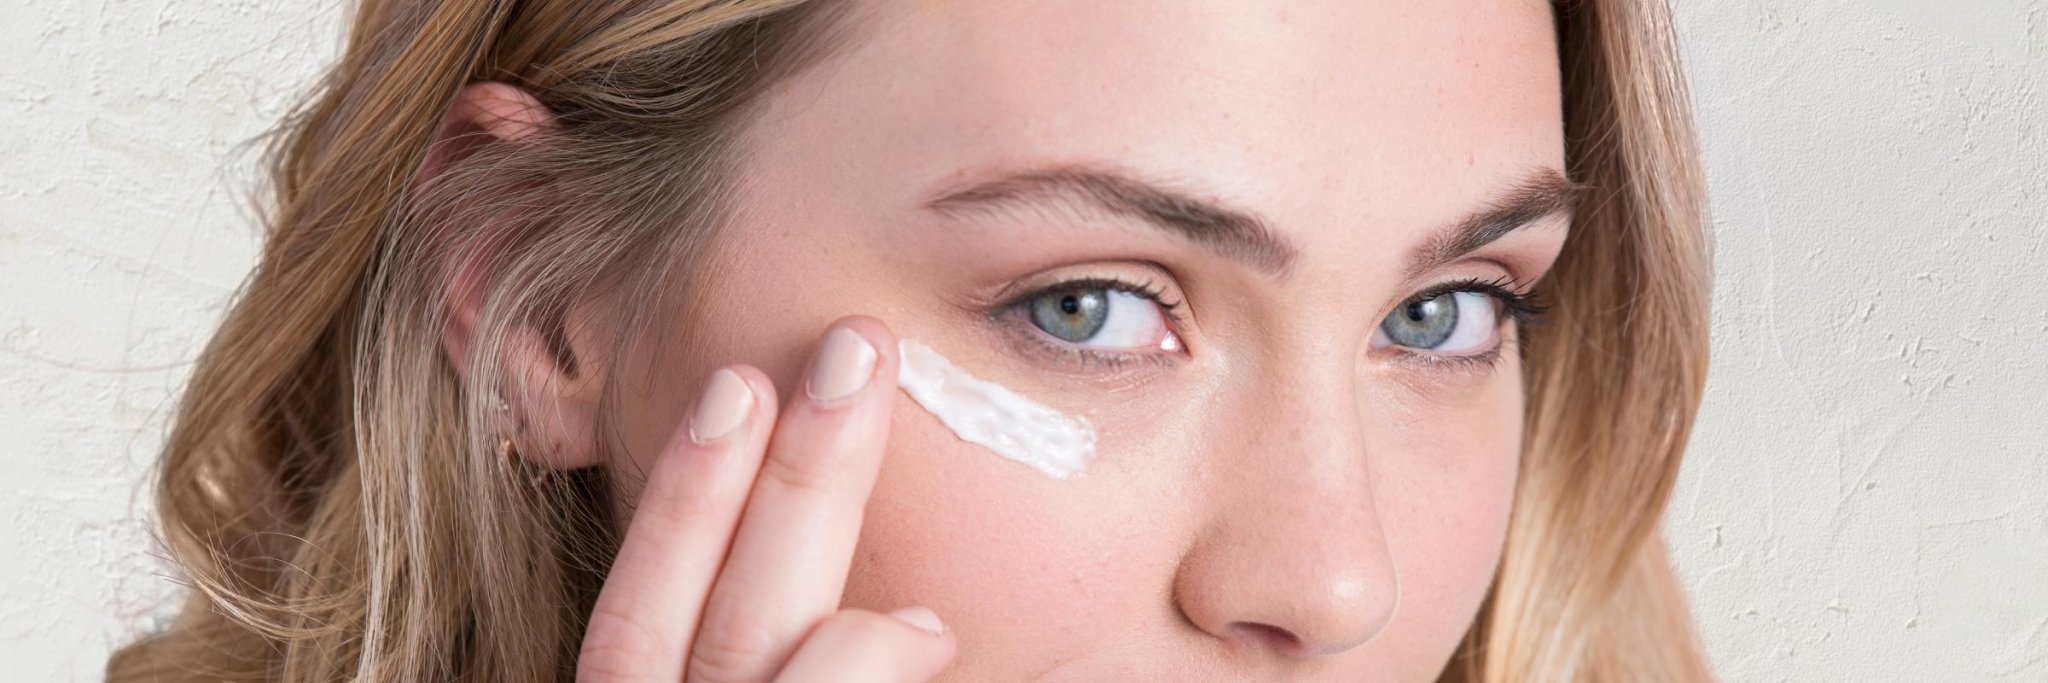 Say Goodbye To Puffy Eyes And Dark Circles With These Remedies